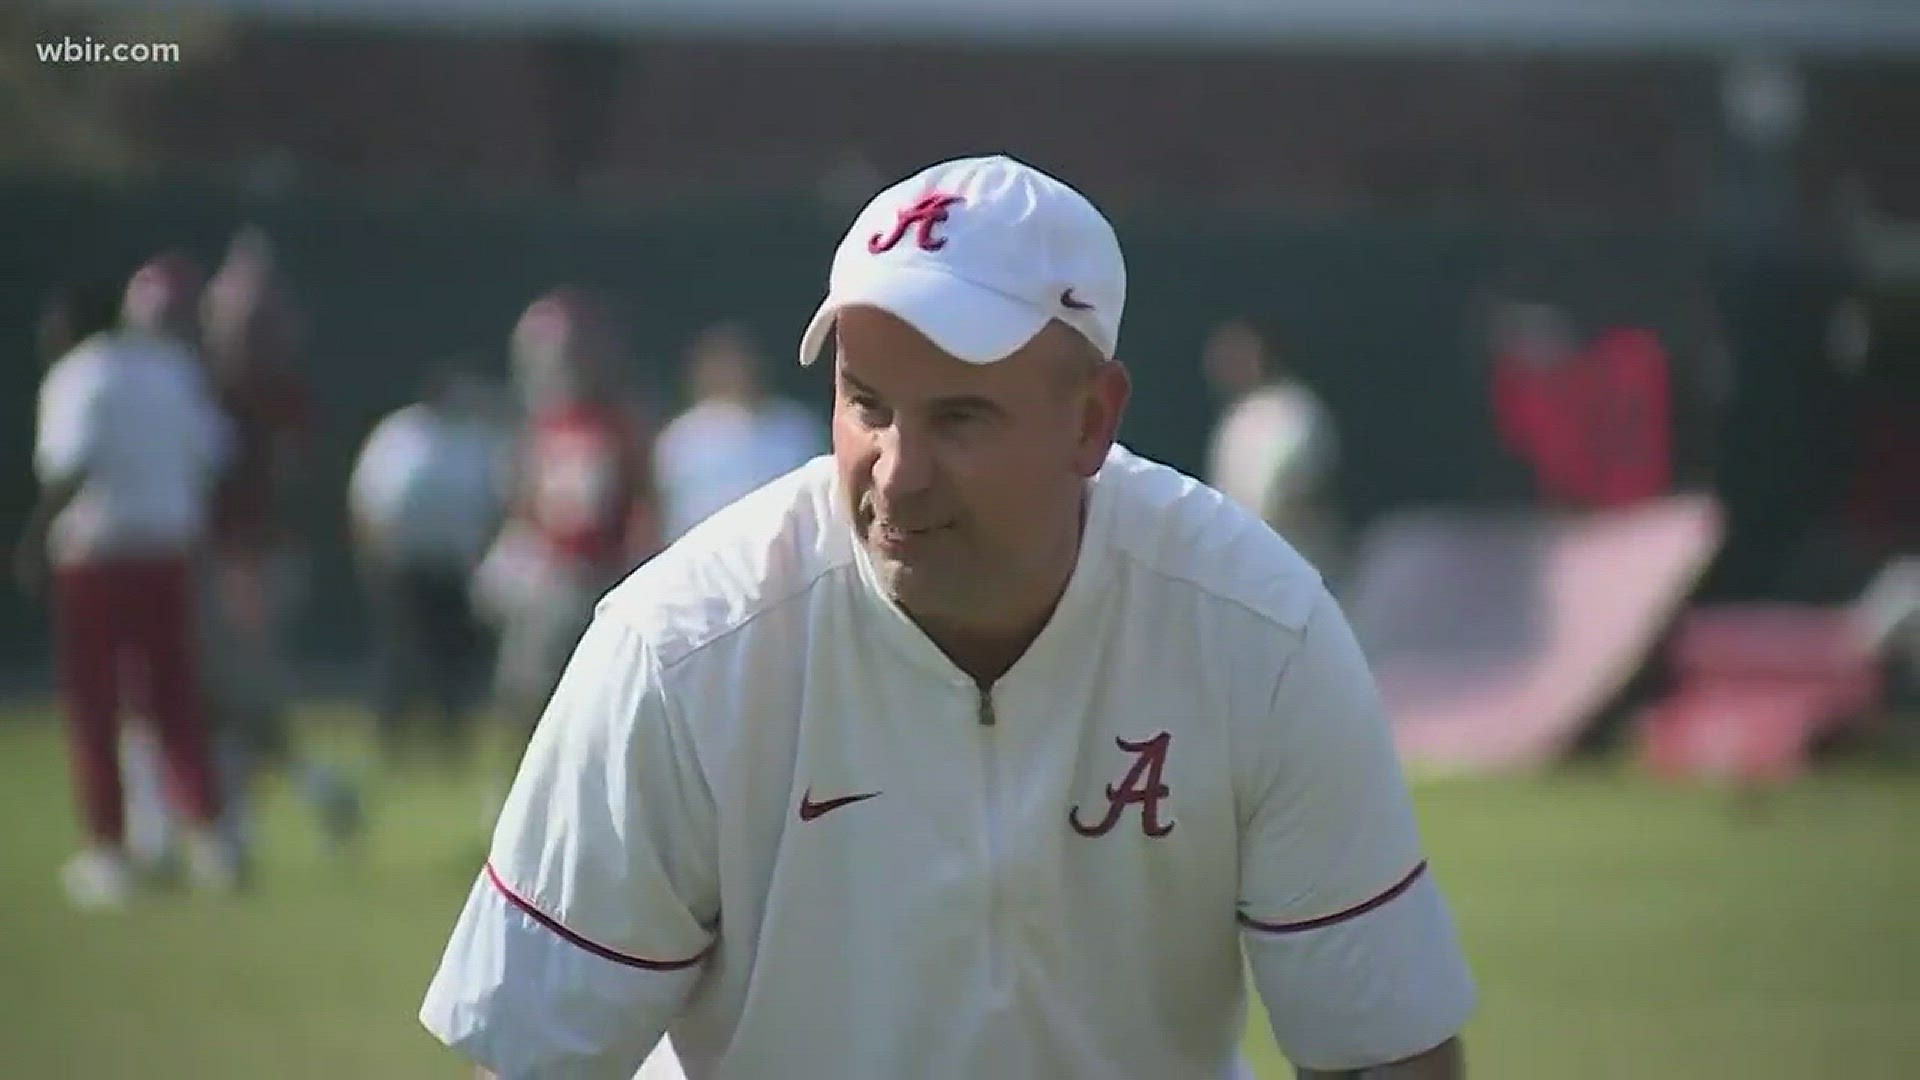 Dec. 6, 2017: After a 24-day search, the Vols could be close to hiring their next head football coach. WBIR has learned from a source close to the coaching search that a deal with Jeremy Pruitt could be nearing completion.